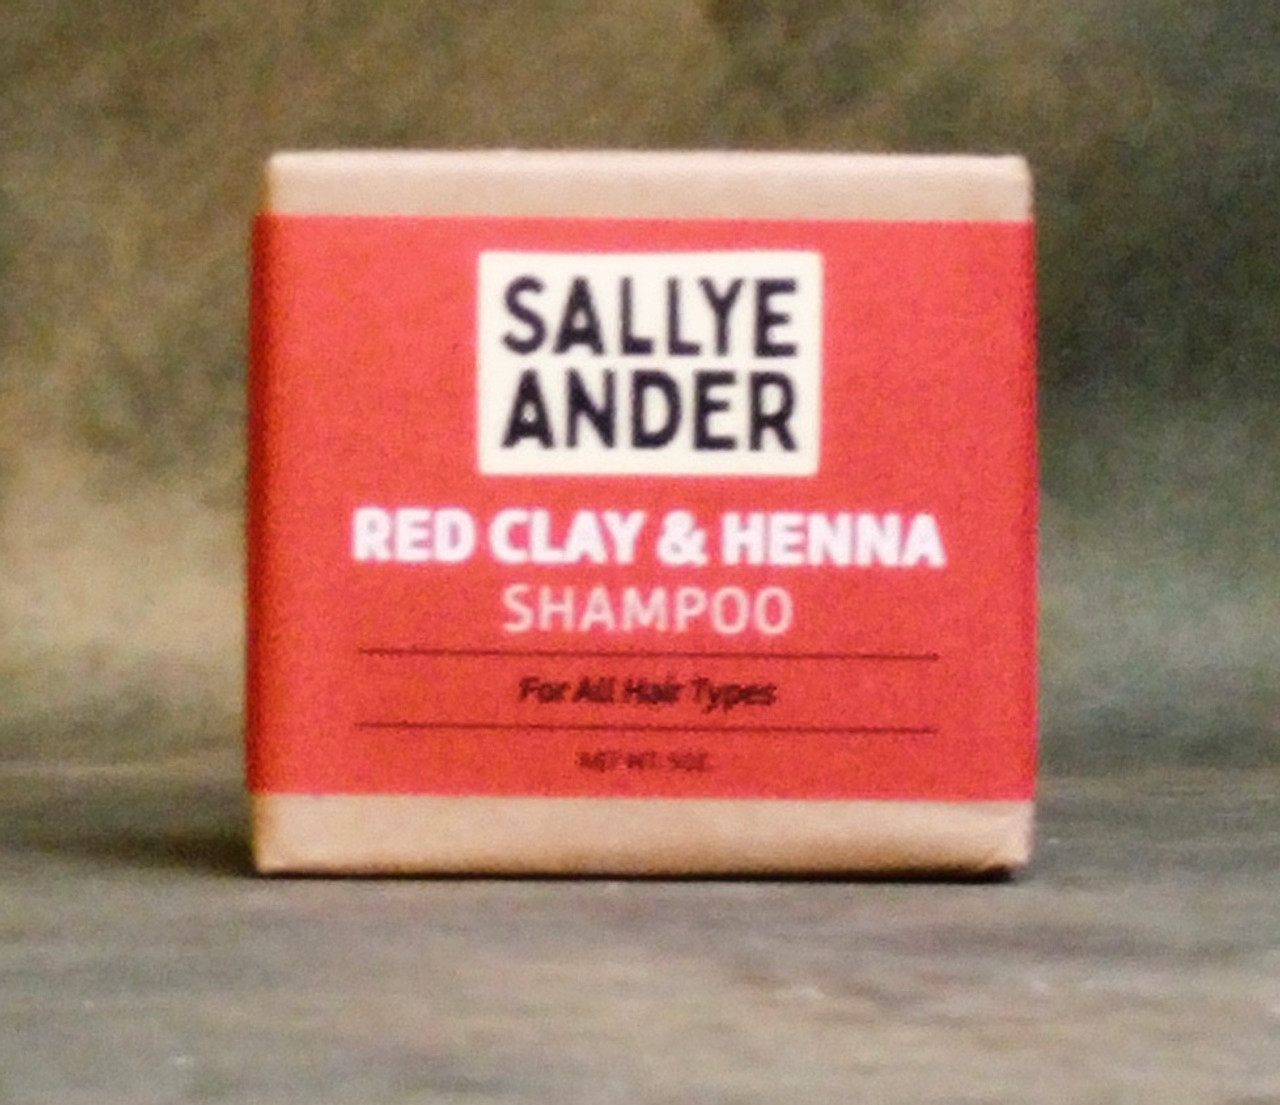 Red clay, its benefits for skin and hair